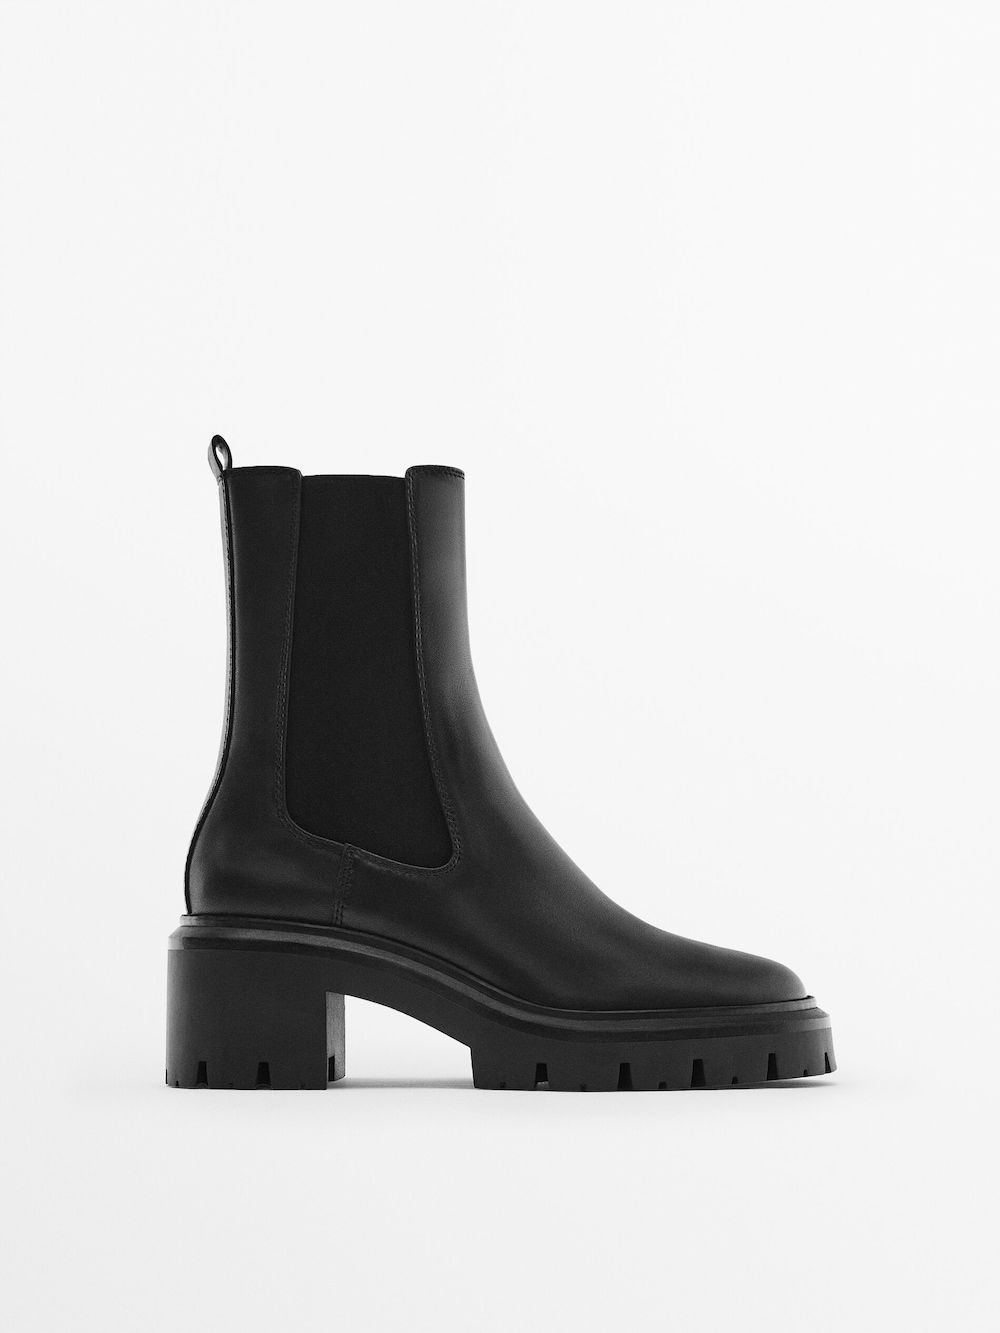 Chelsea boots with track soles | Massimo Dutti (US)